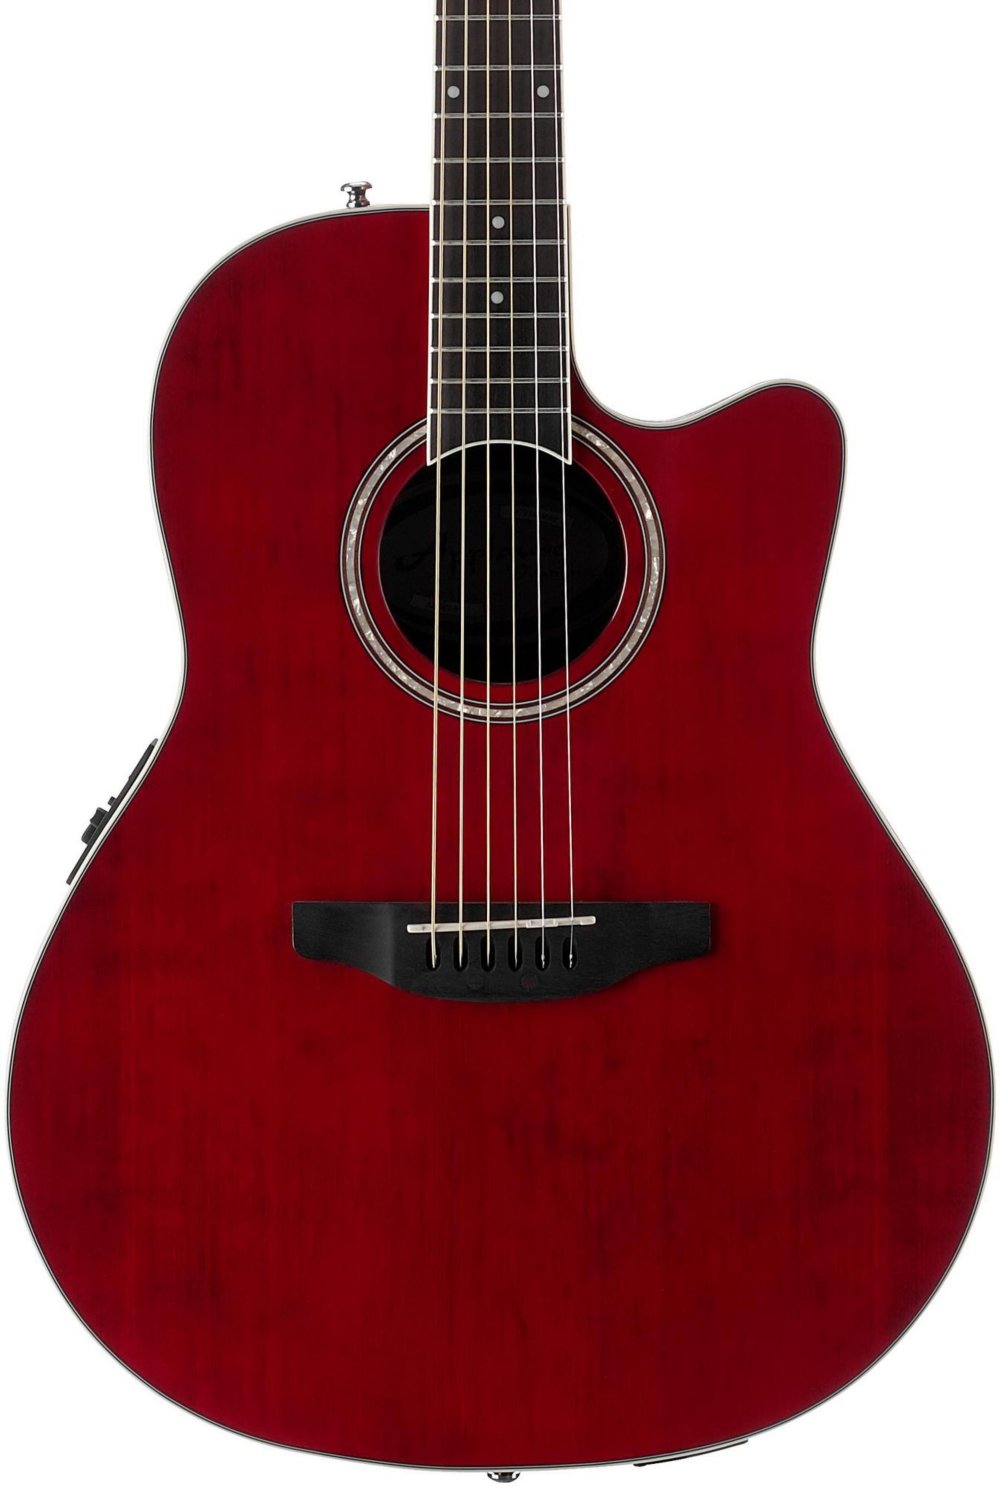 Ovation Applause 6 String Acoustic-Electric guitar, Right, Ruby Red, Mid Depth (AB24II-RR)